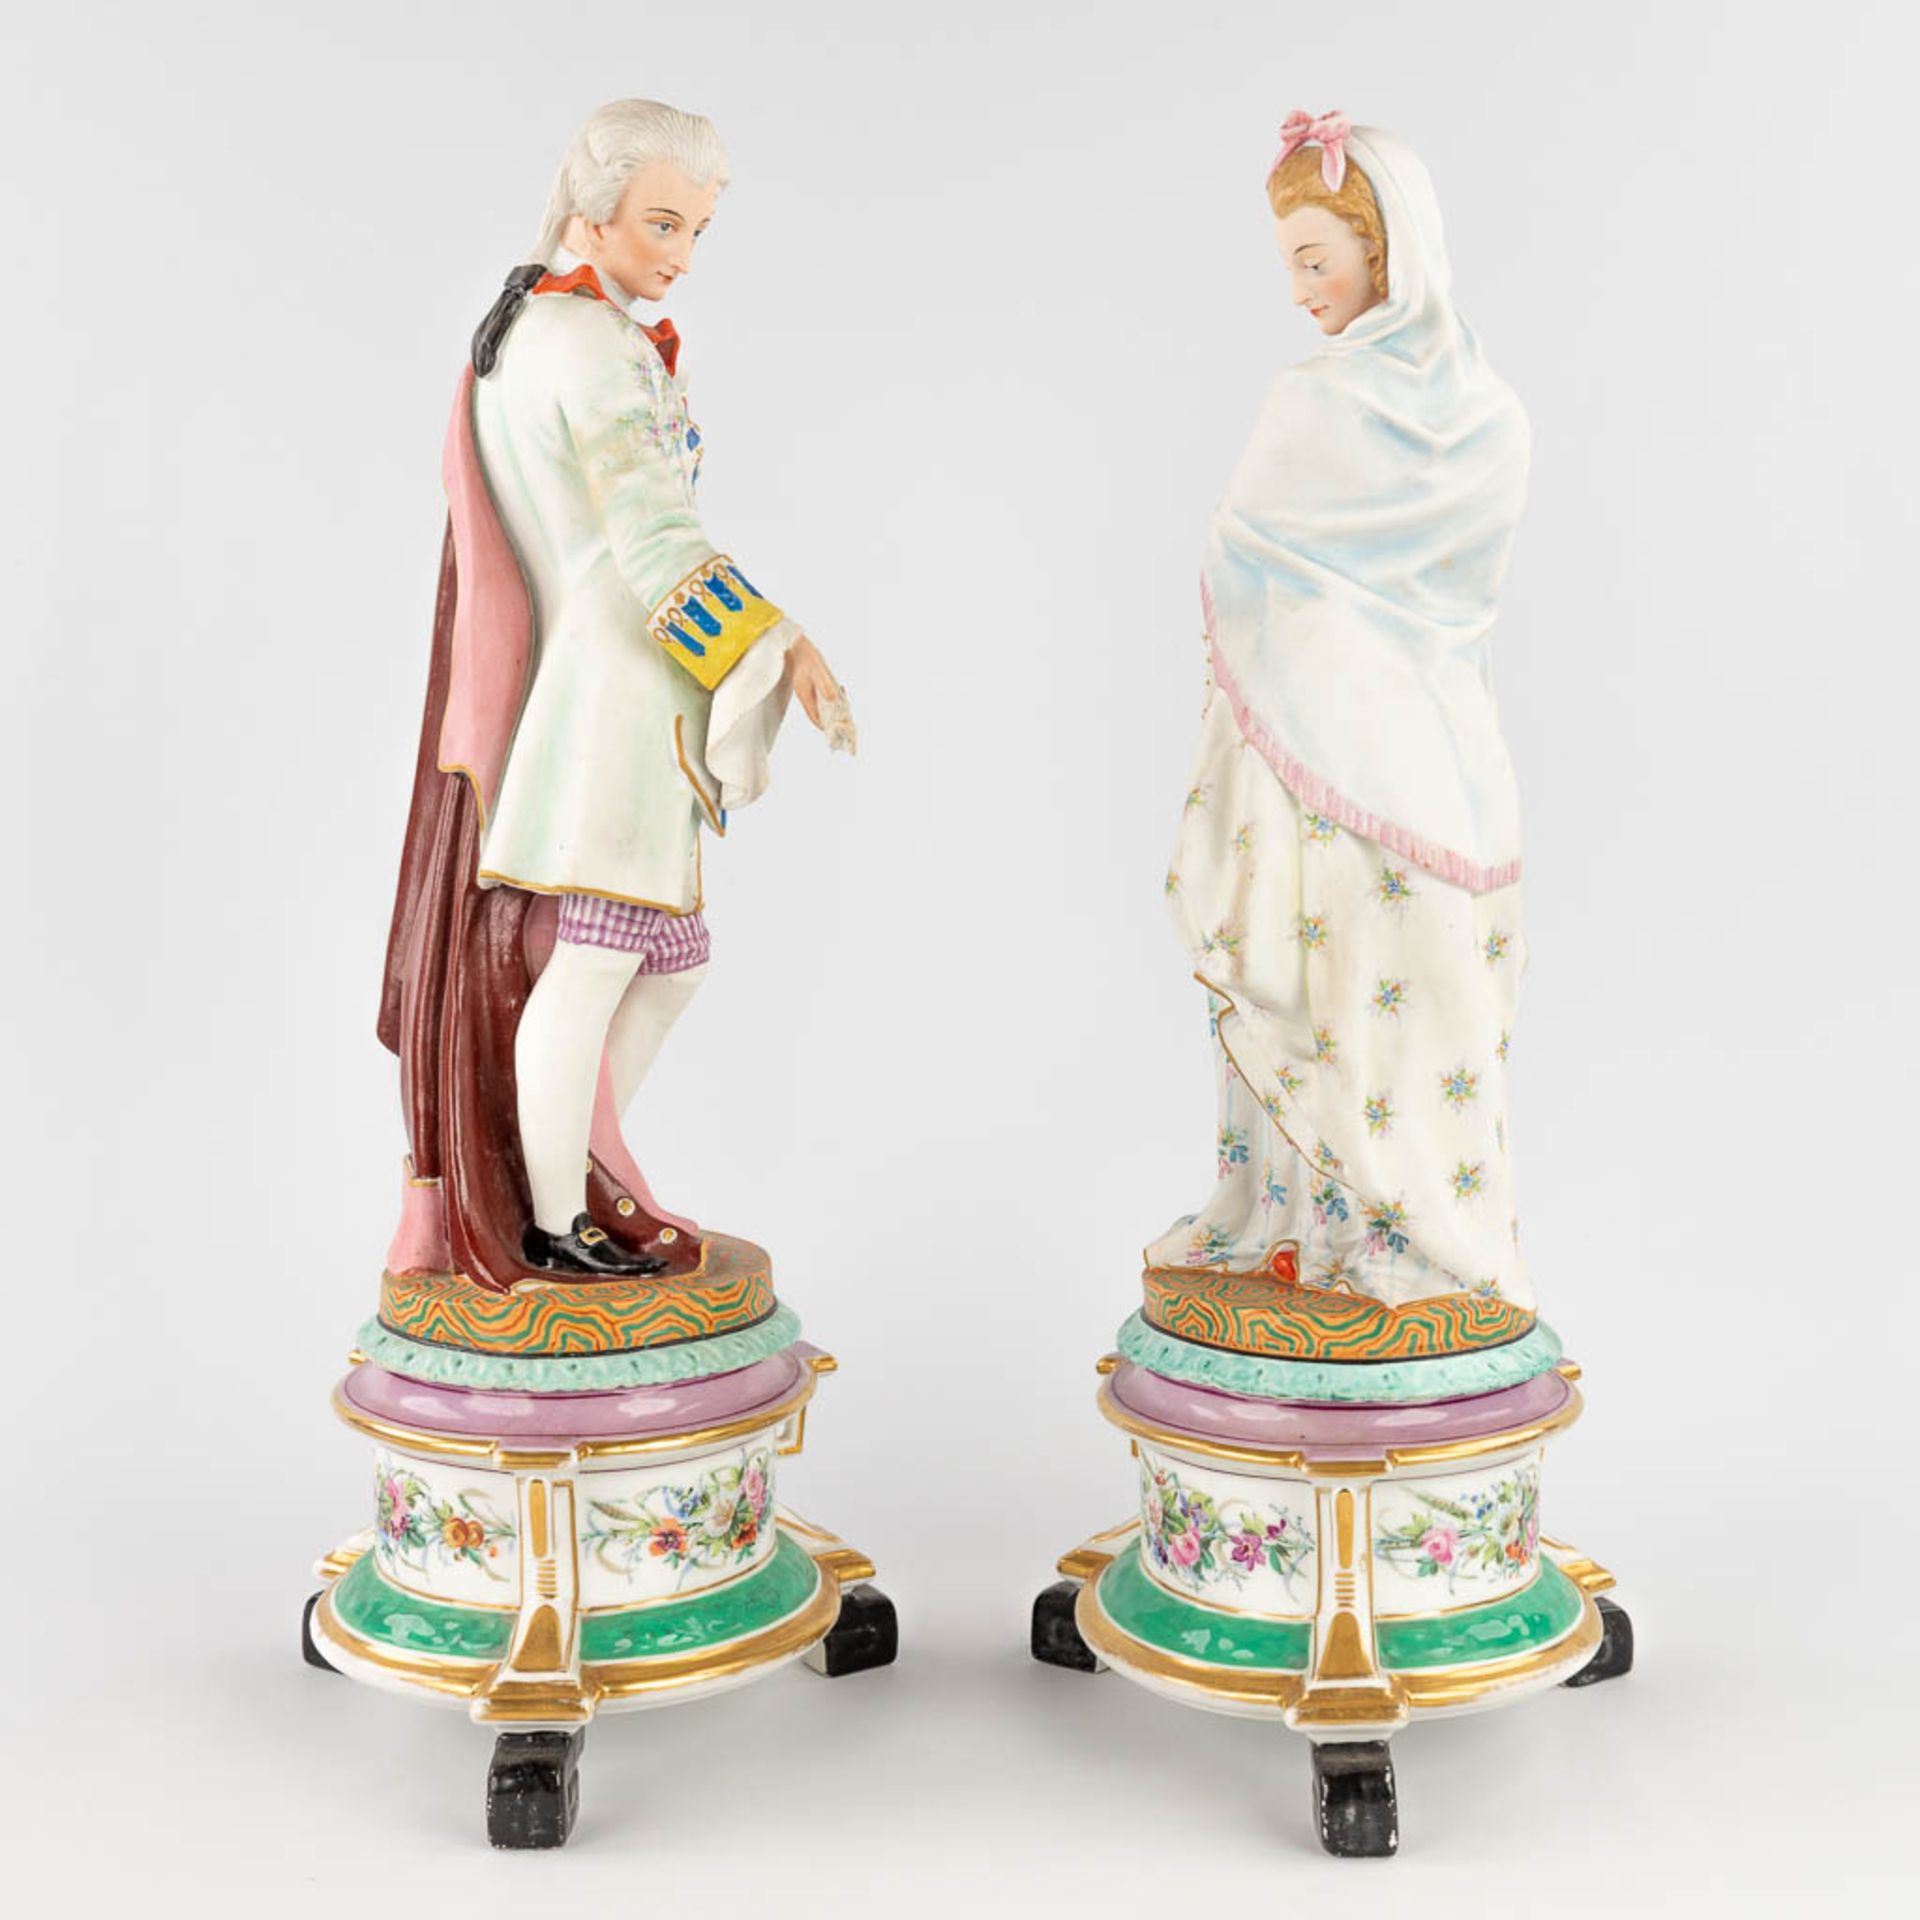 A pair of antique bisque figurines, standing on a glazed porcelain base. (L: 18 x W: 18 x H: 49 cm) - Image 3 of 24